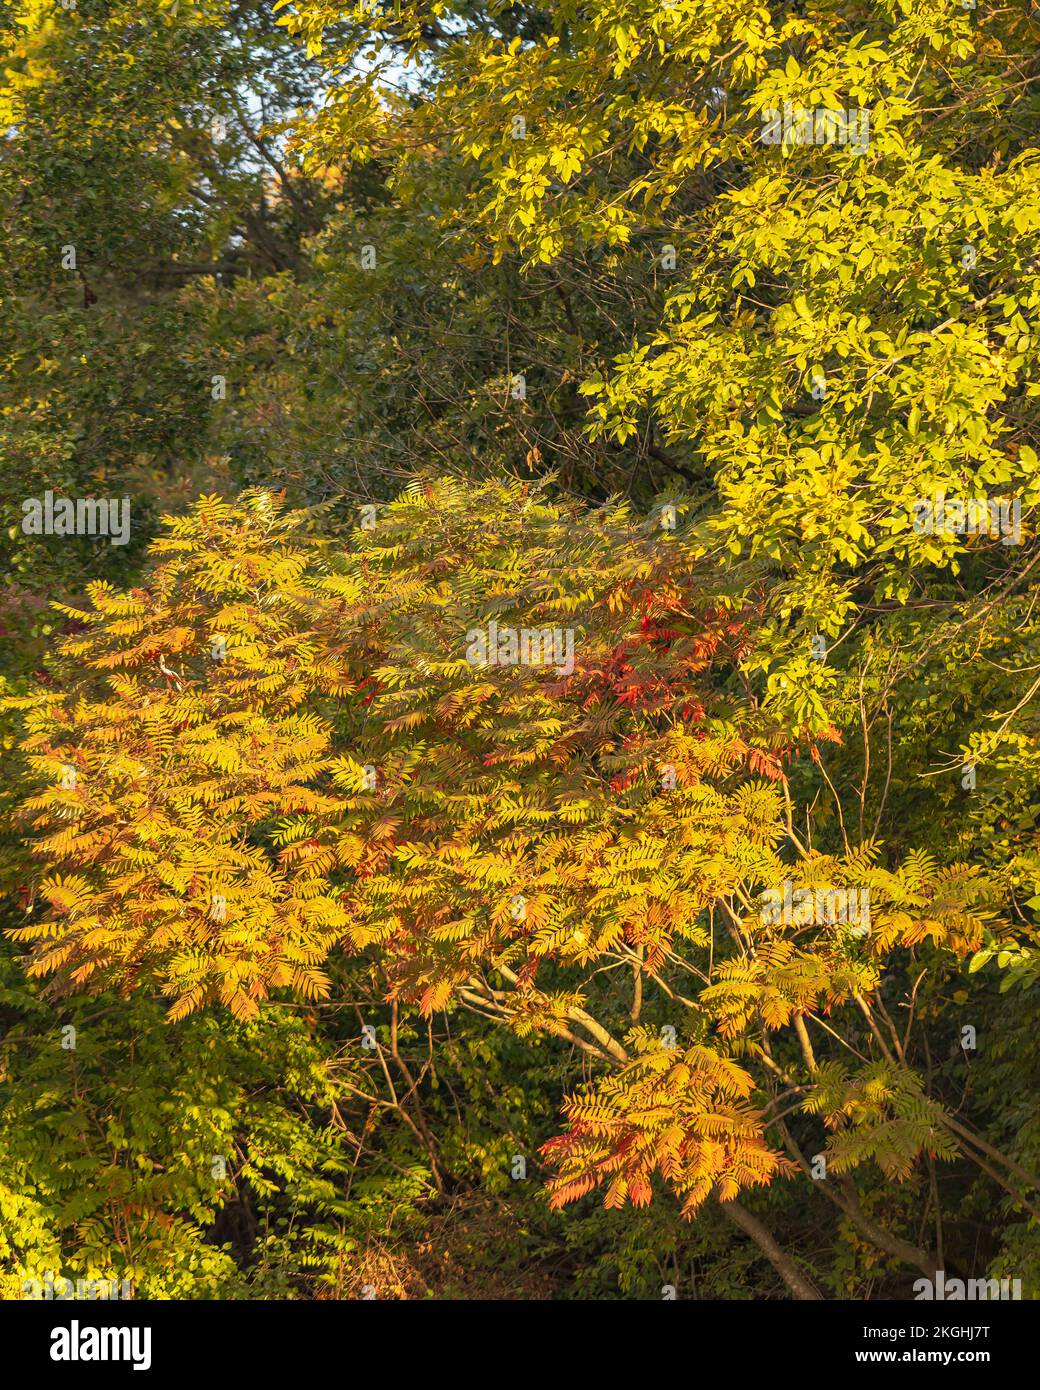 The colorful foliage of yellow Staghorn sumac plant during autumn season Stock Photo